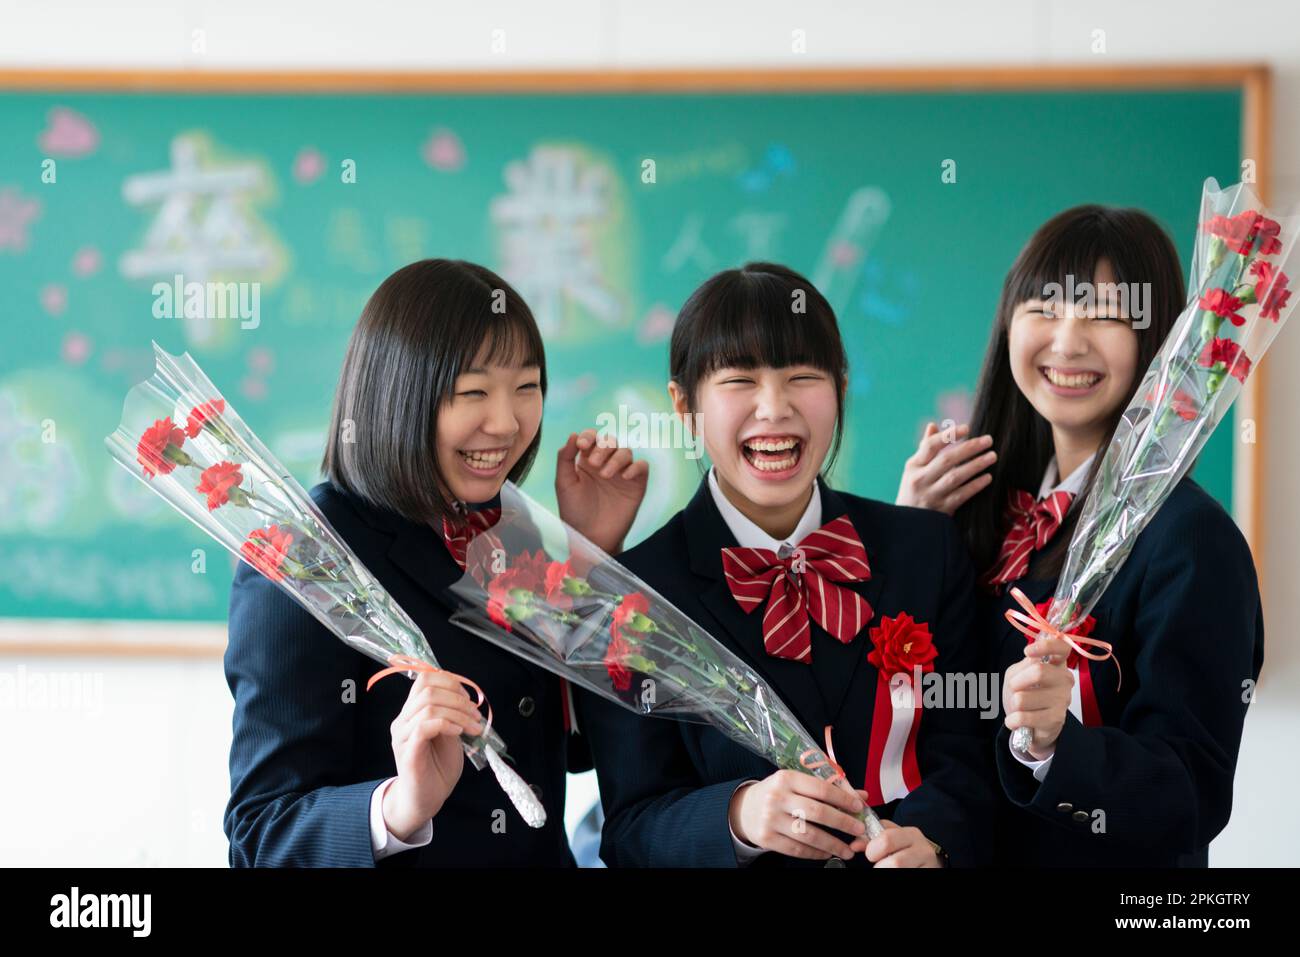 Female student holding and smiling at a flower Stock Photo